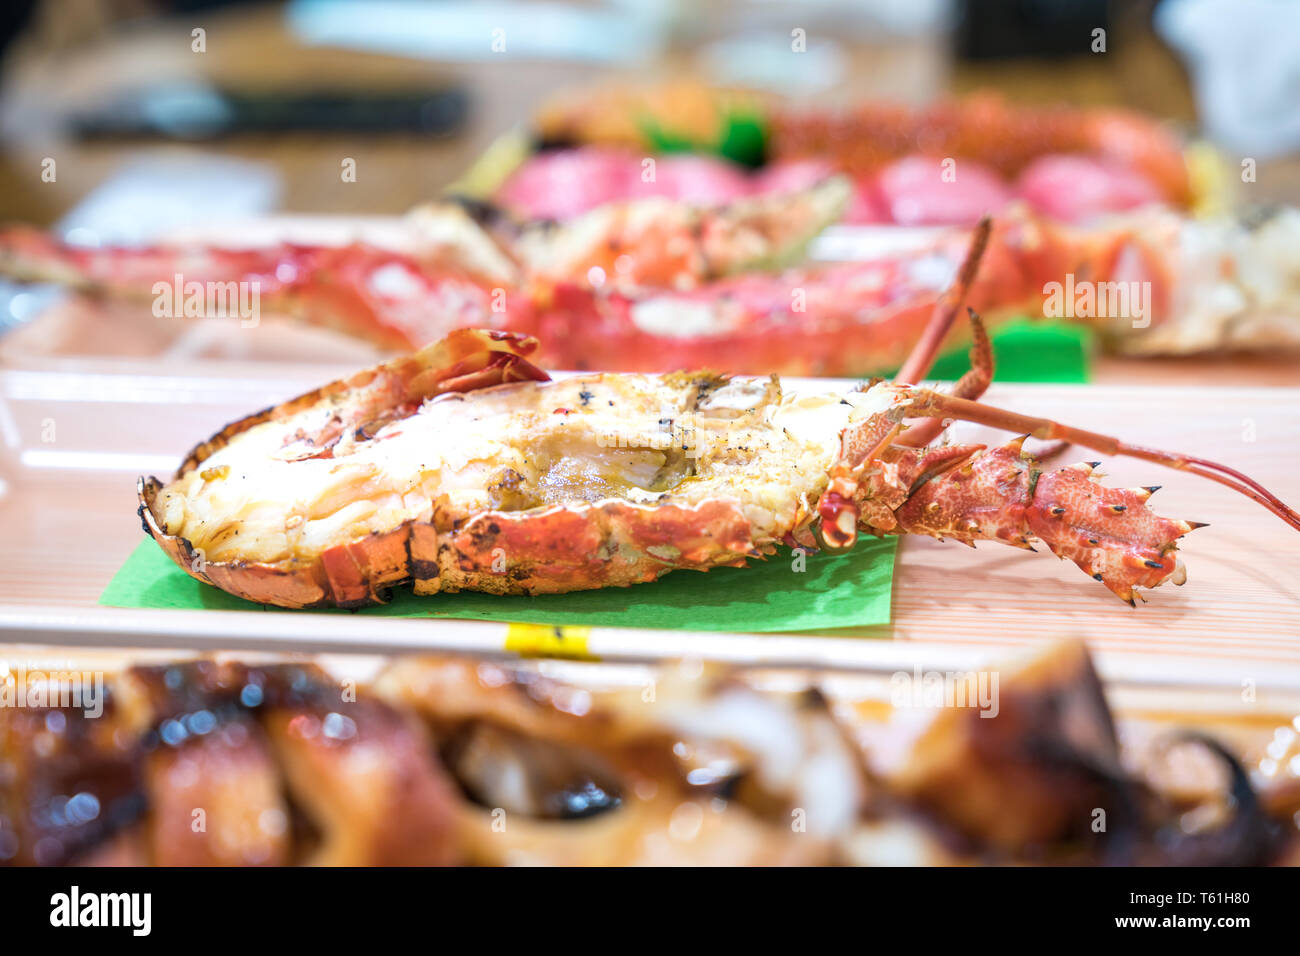 Focus and close up to grilled shrimp in Foam plate on the wood table. Stock Photo